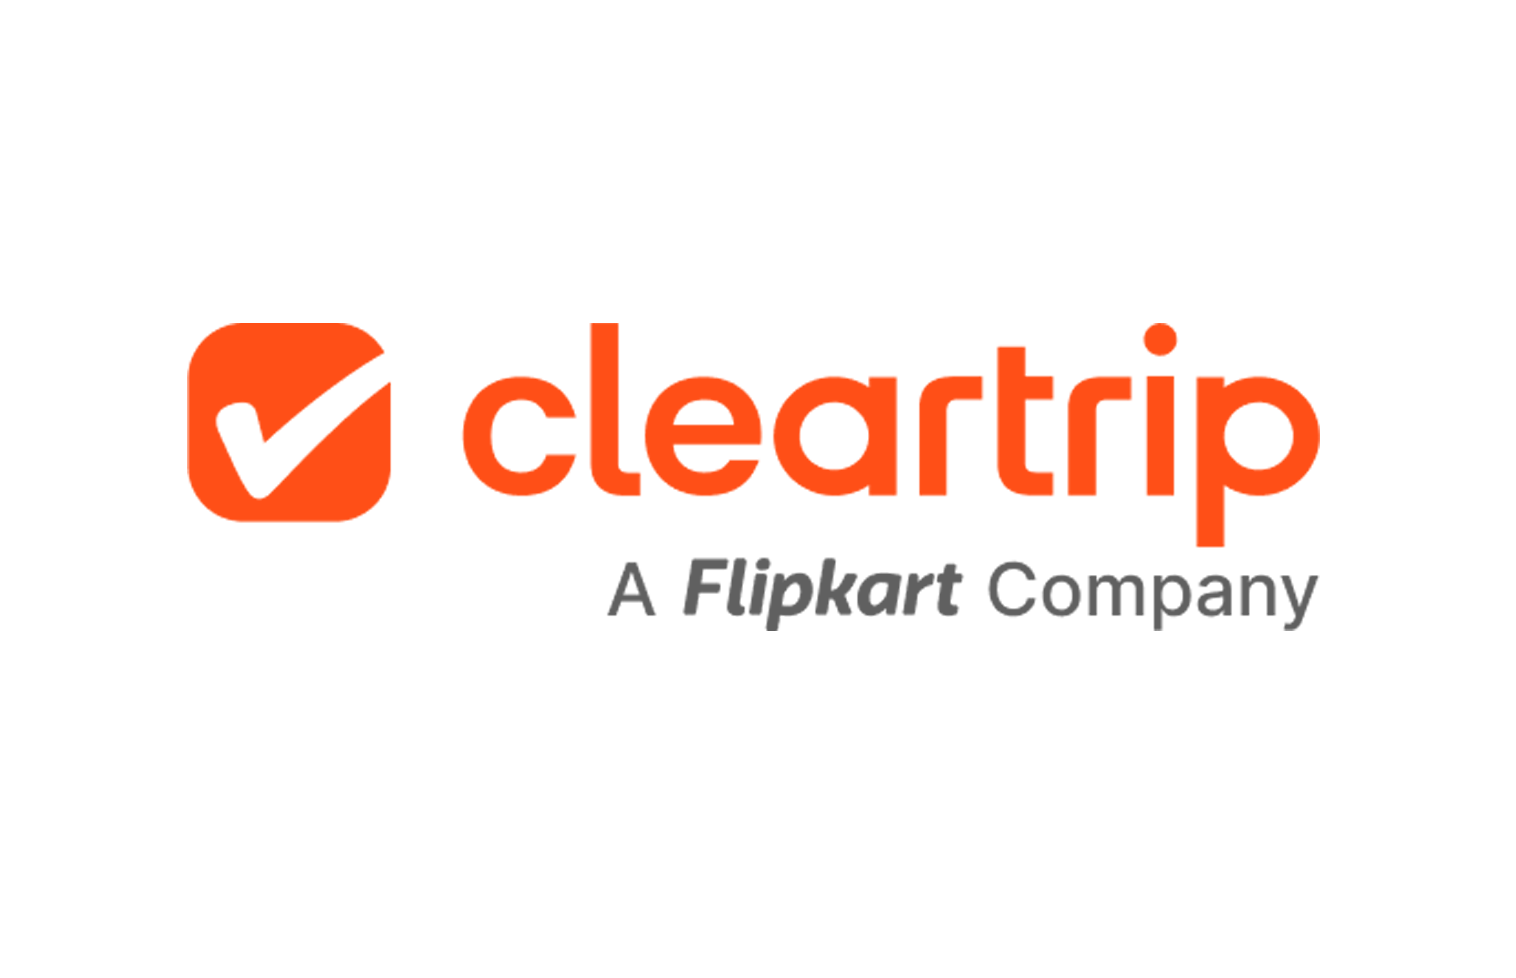 Cleartrip partners with KSRTC to provide over 4500 bus connections in the state